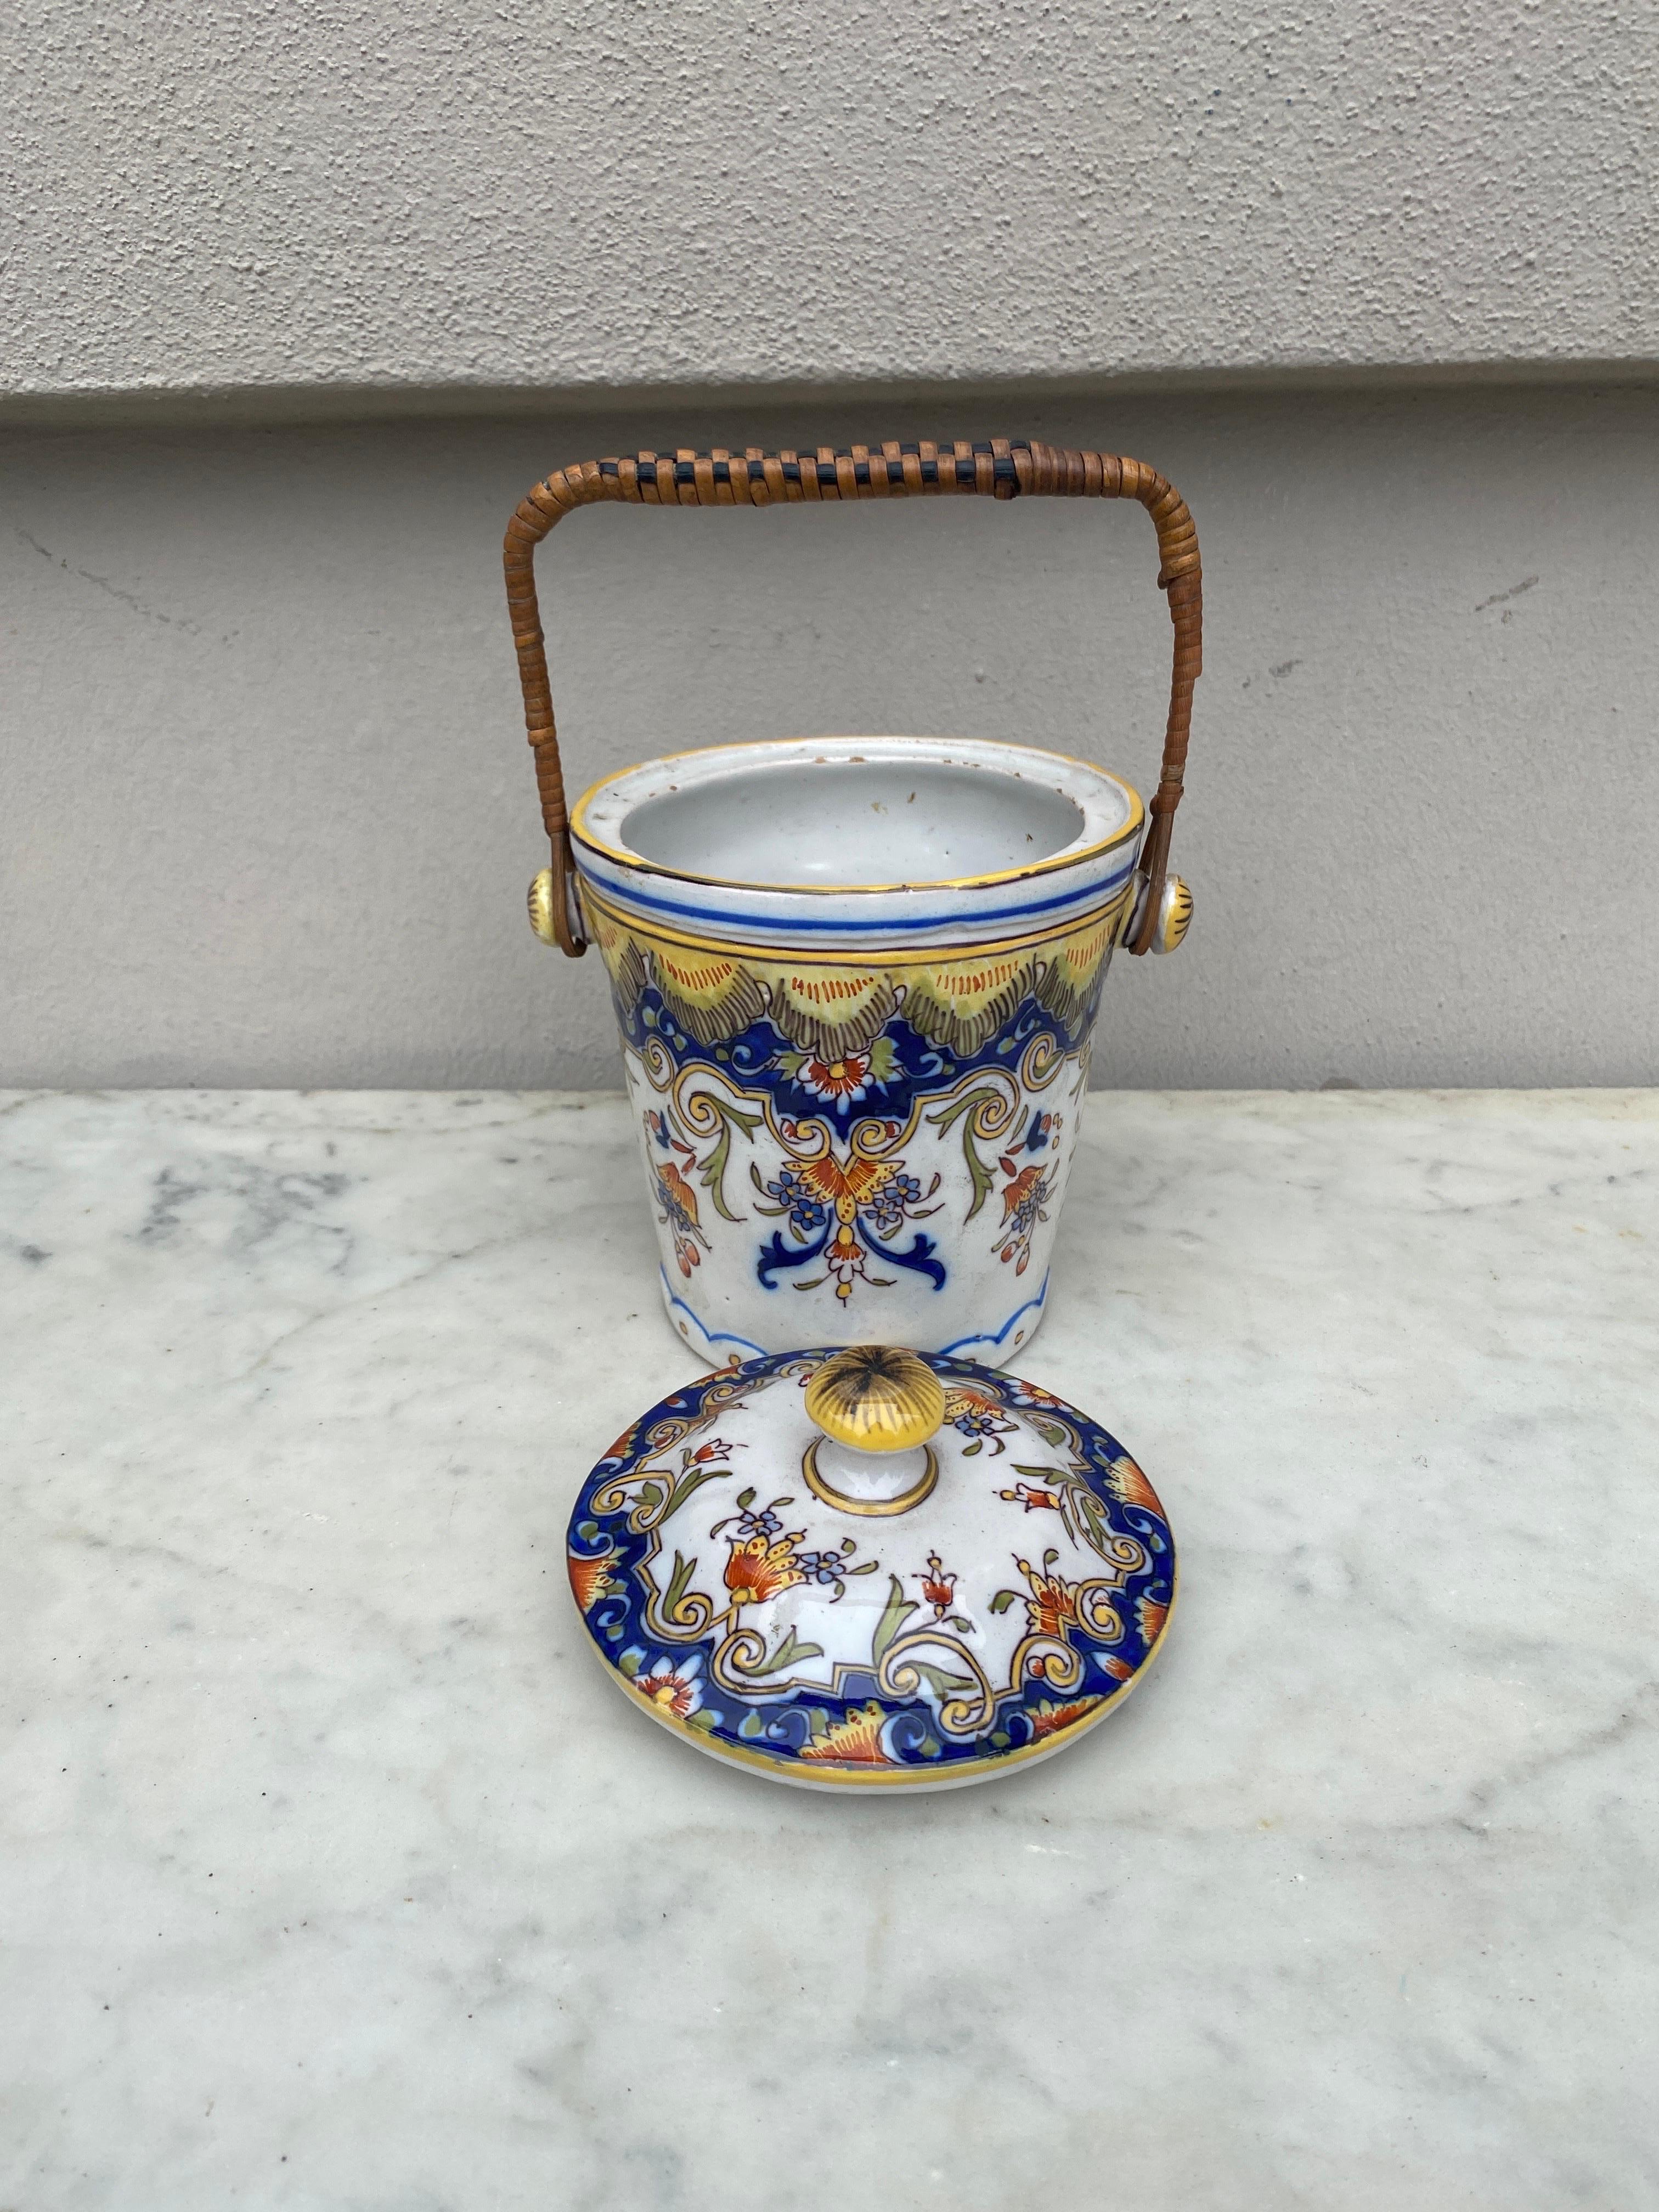 French Faience Biscuit Barrel Desvres Circa 1900 In Fair Condition For Sale In Austin, TX